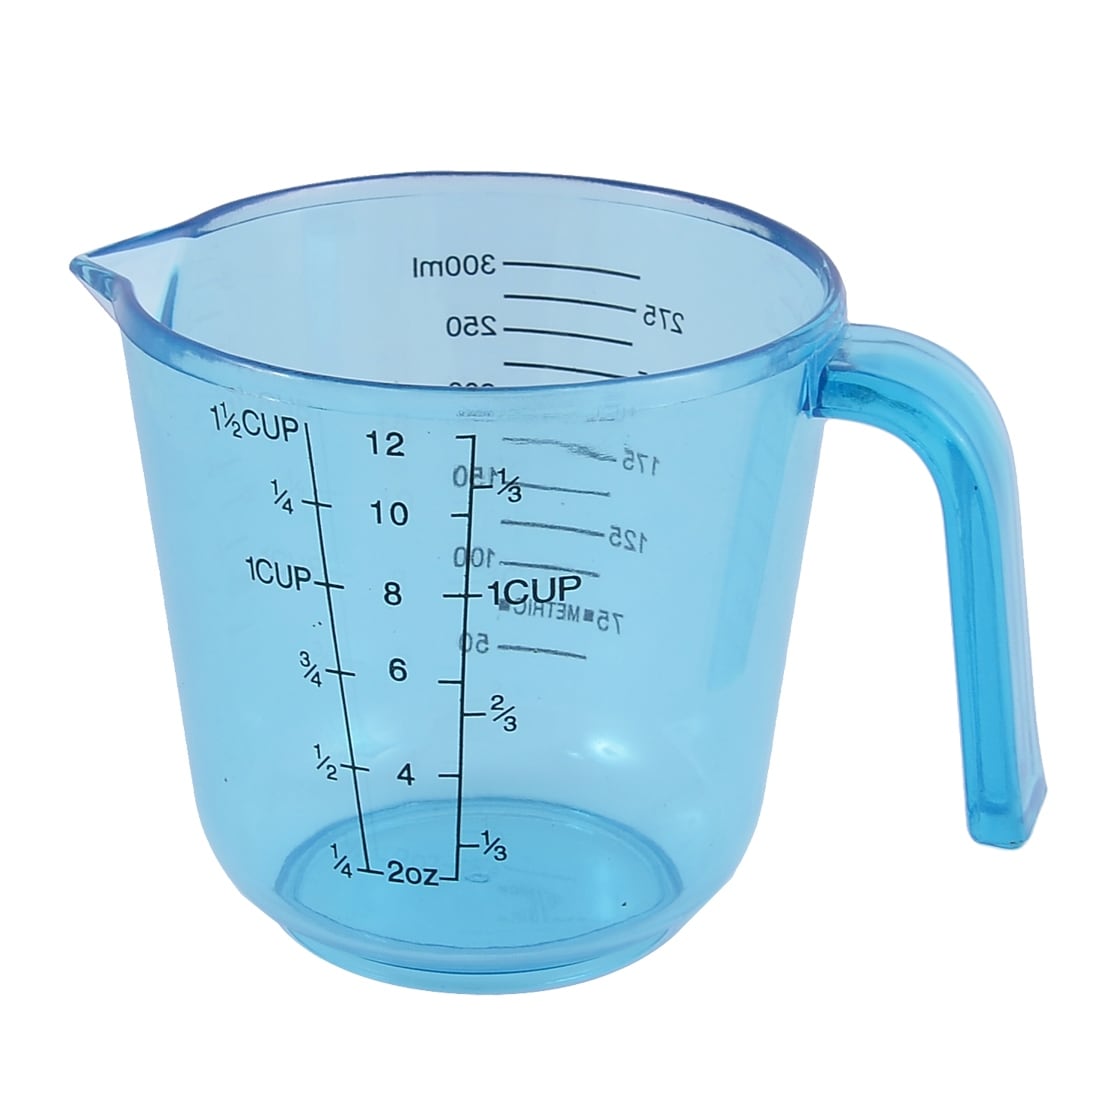 https://ak1.ostkcdn.com/images/products/is/images/direct/571d1e47de7edacf032a71b3f46dabd9ad94cace/Bakery-Baking-Plastic-Water-Liquid-Measuring-Cup-300ml-Clear-Blue.jpg